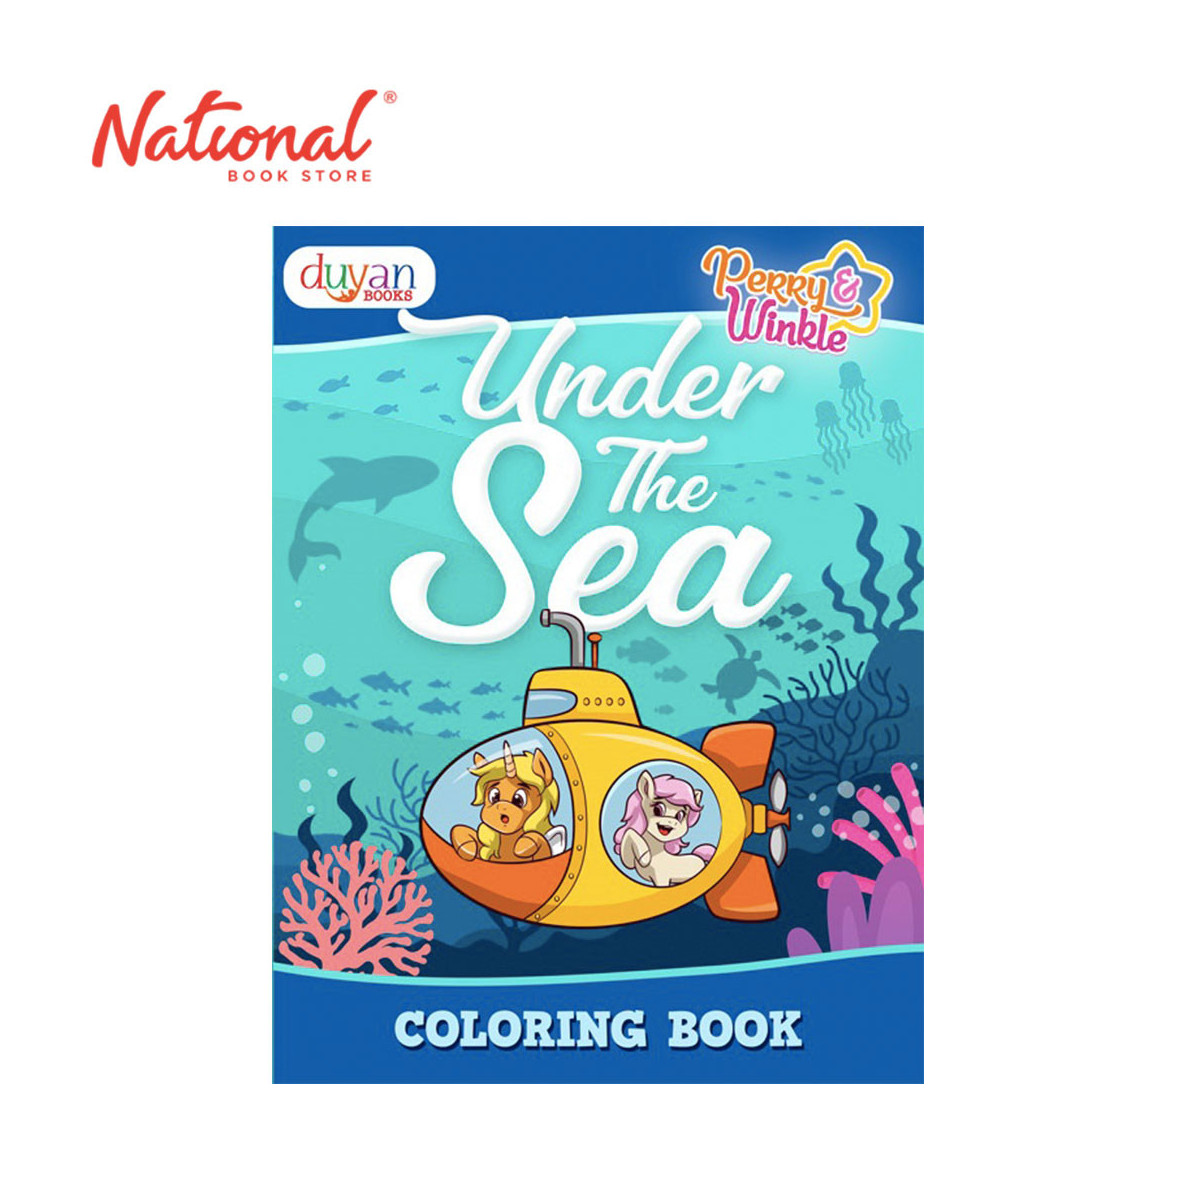 Under the Sea: Coloring Book - Trade Paperback - Activity Books for Kids